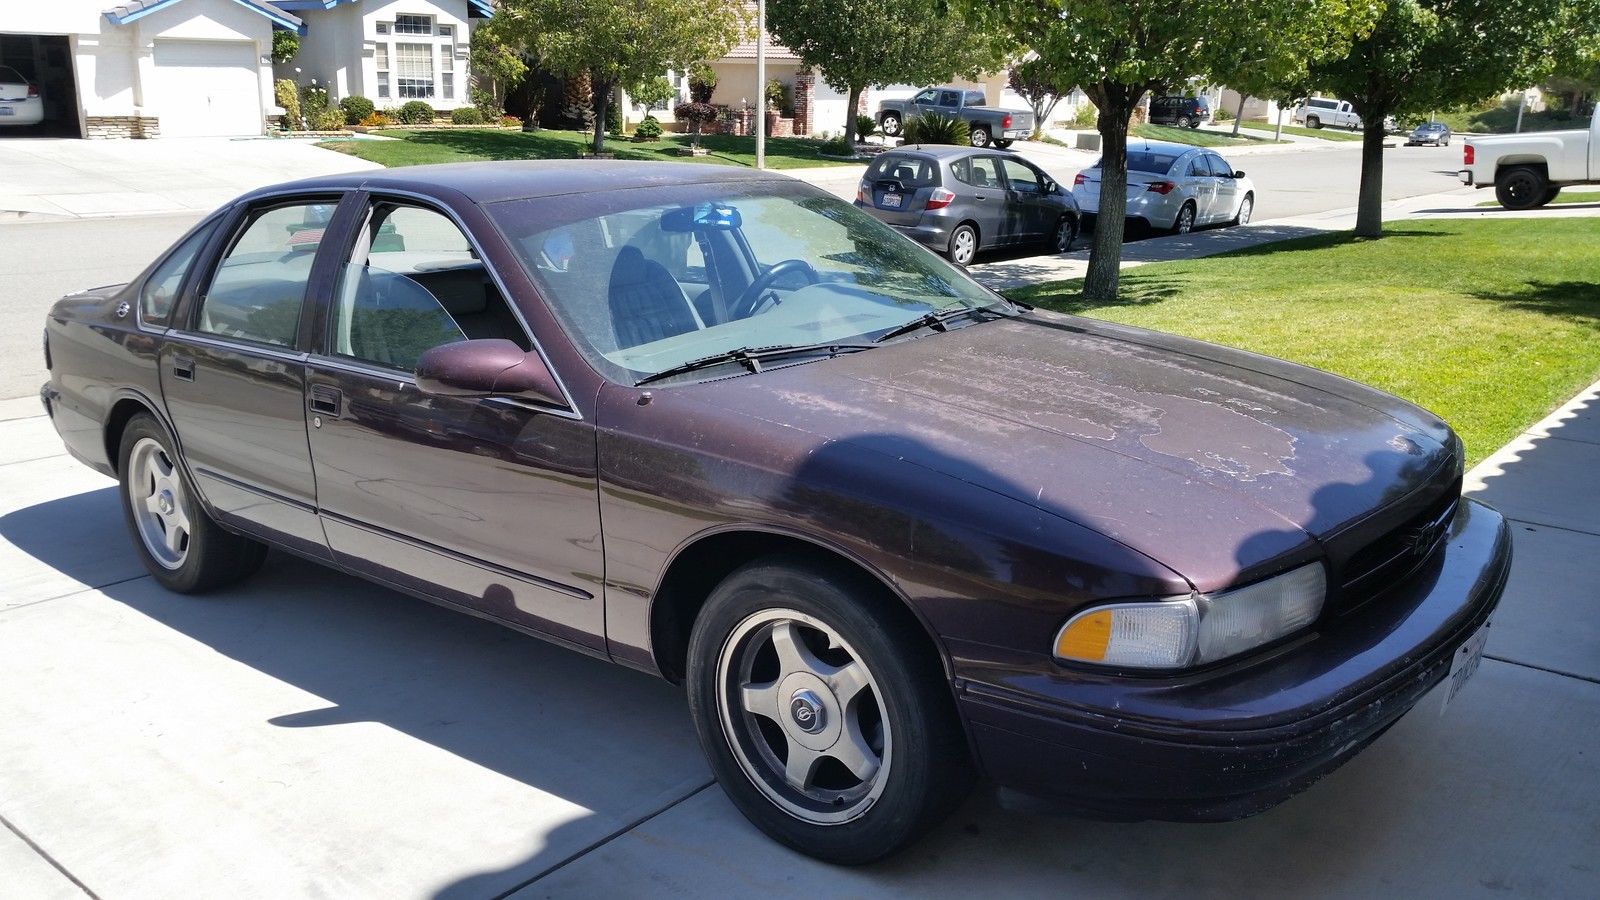 1994 Chevrolet Impala SS for sale in Palmdale, California, United States.